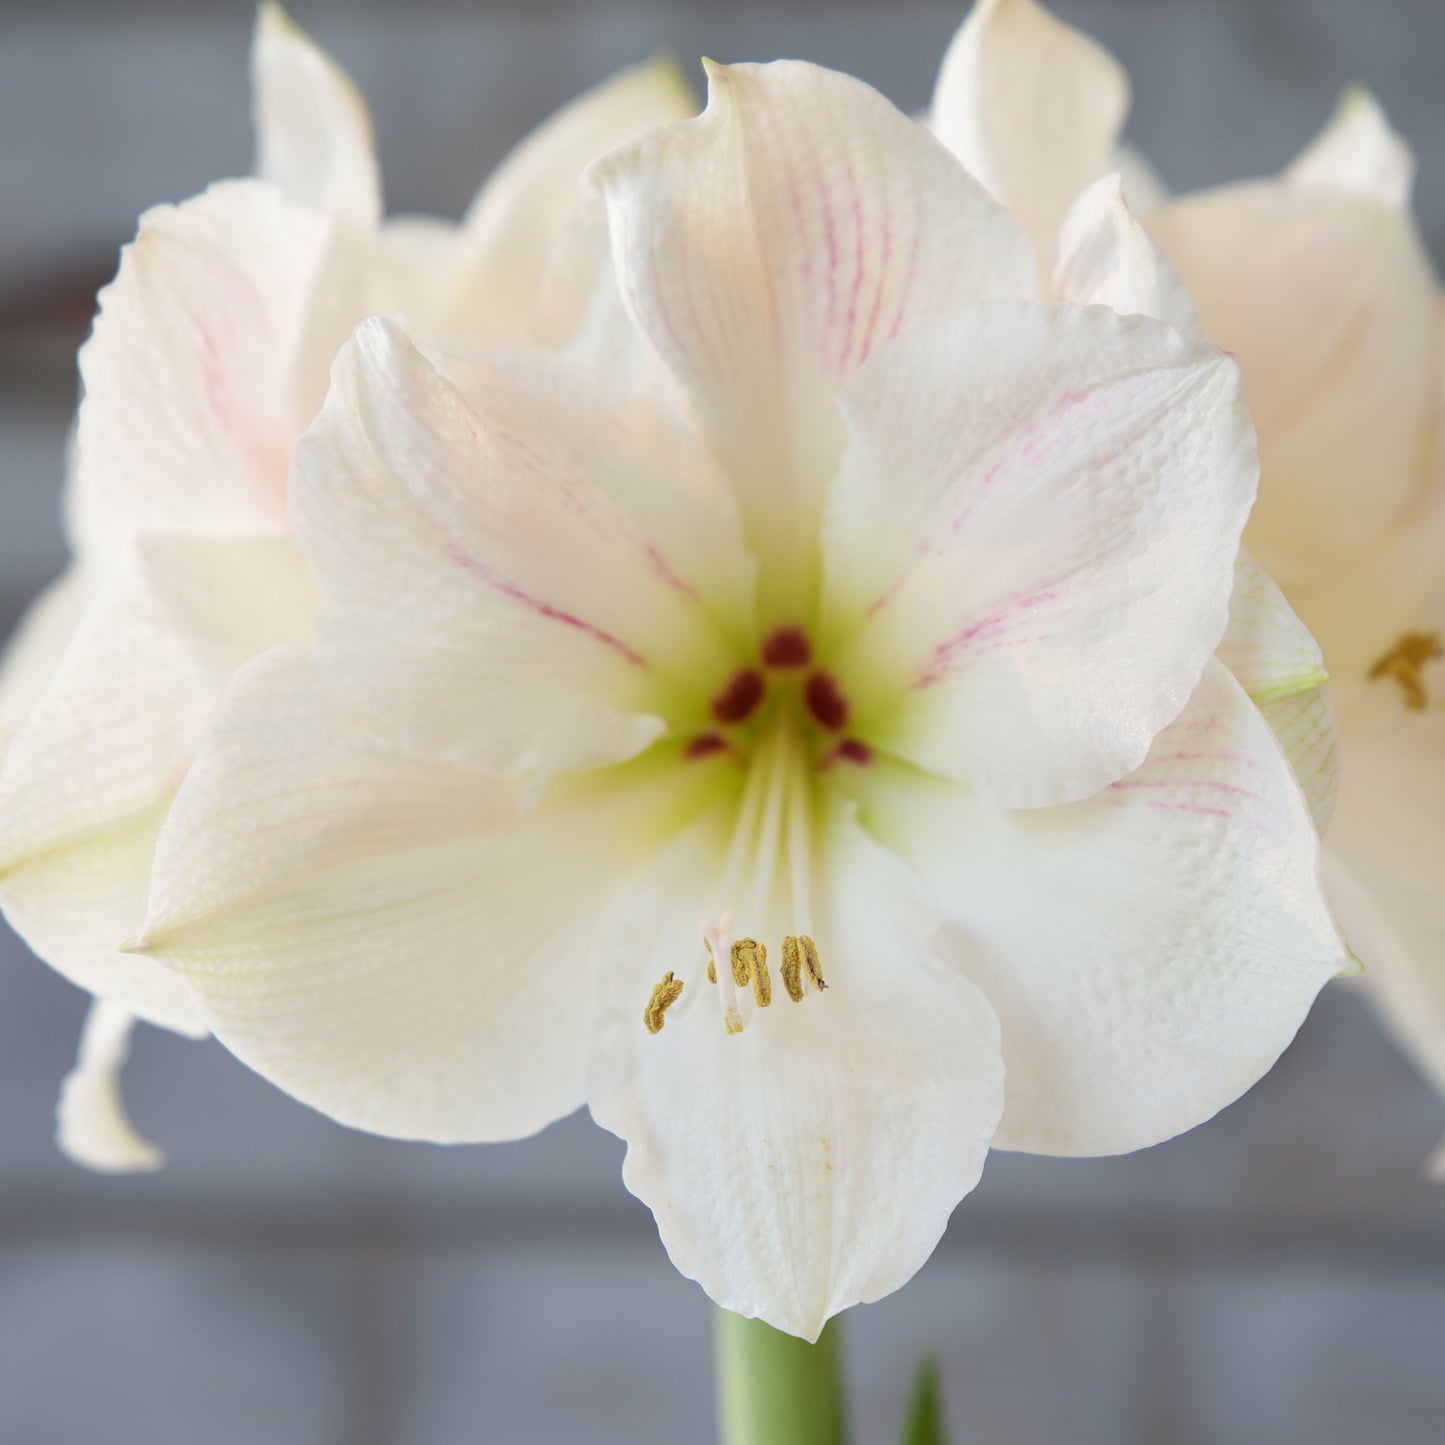 amaryllis blue wax with white blooms